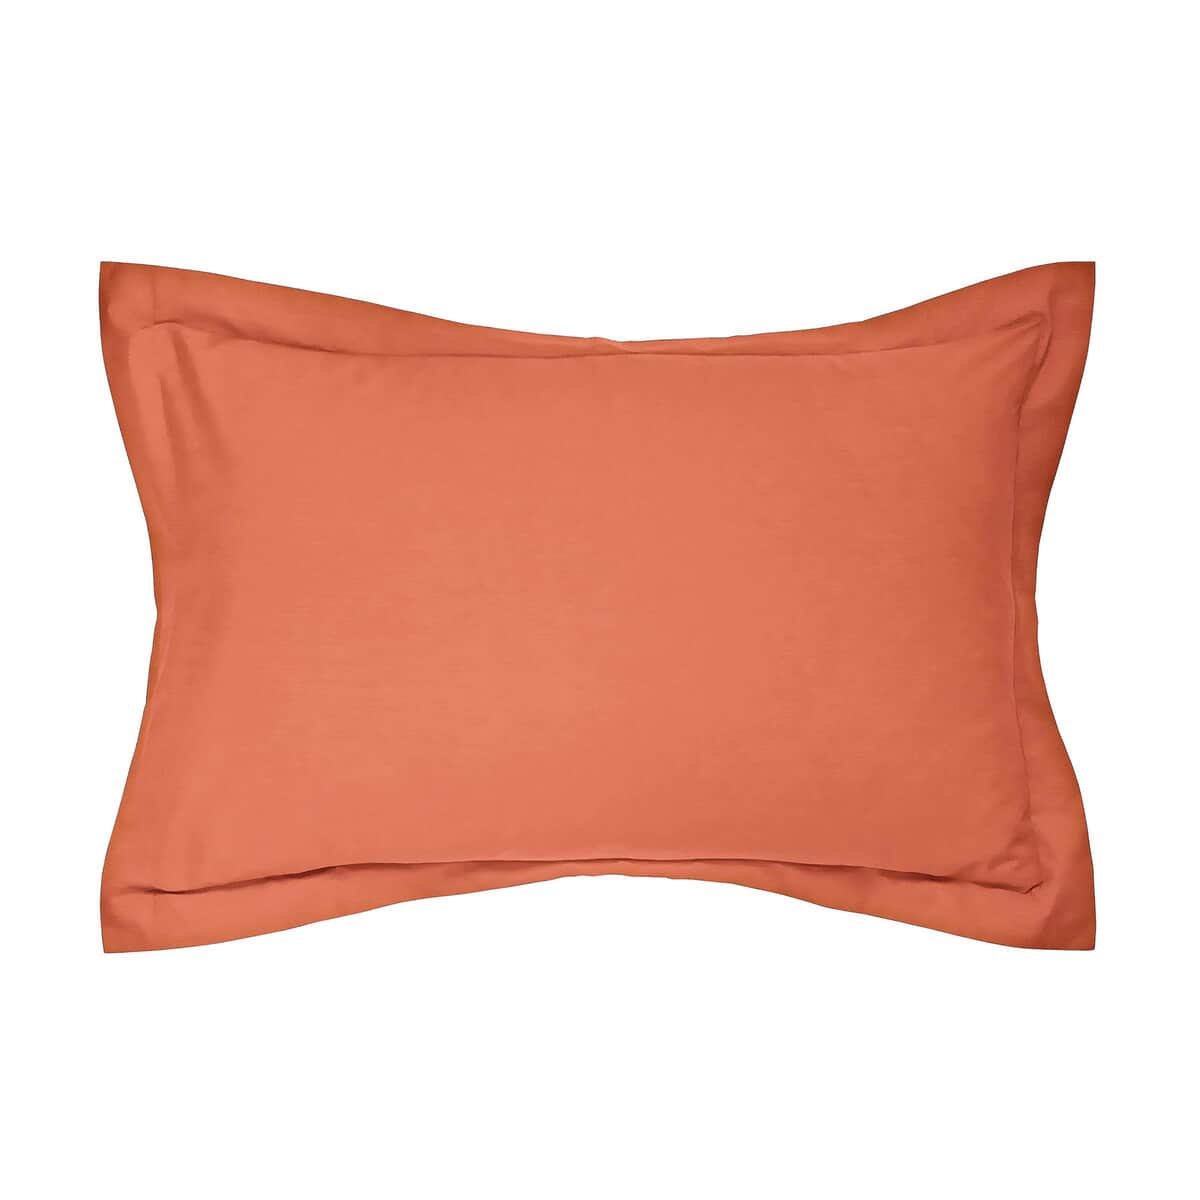 Helena Springfield 50/50 Polycotton Coral large